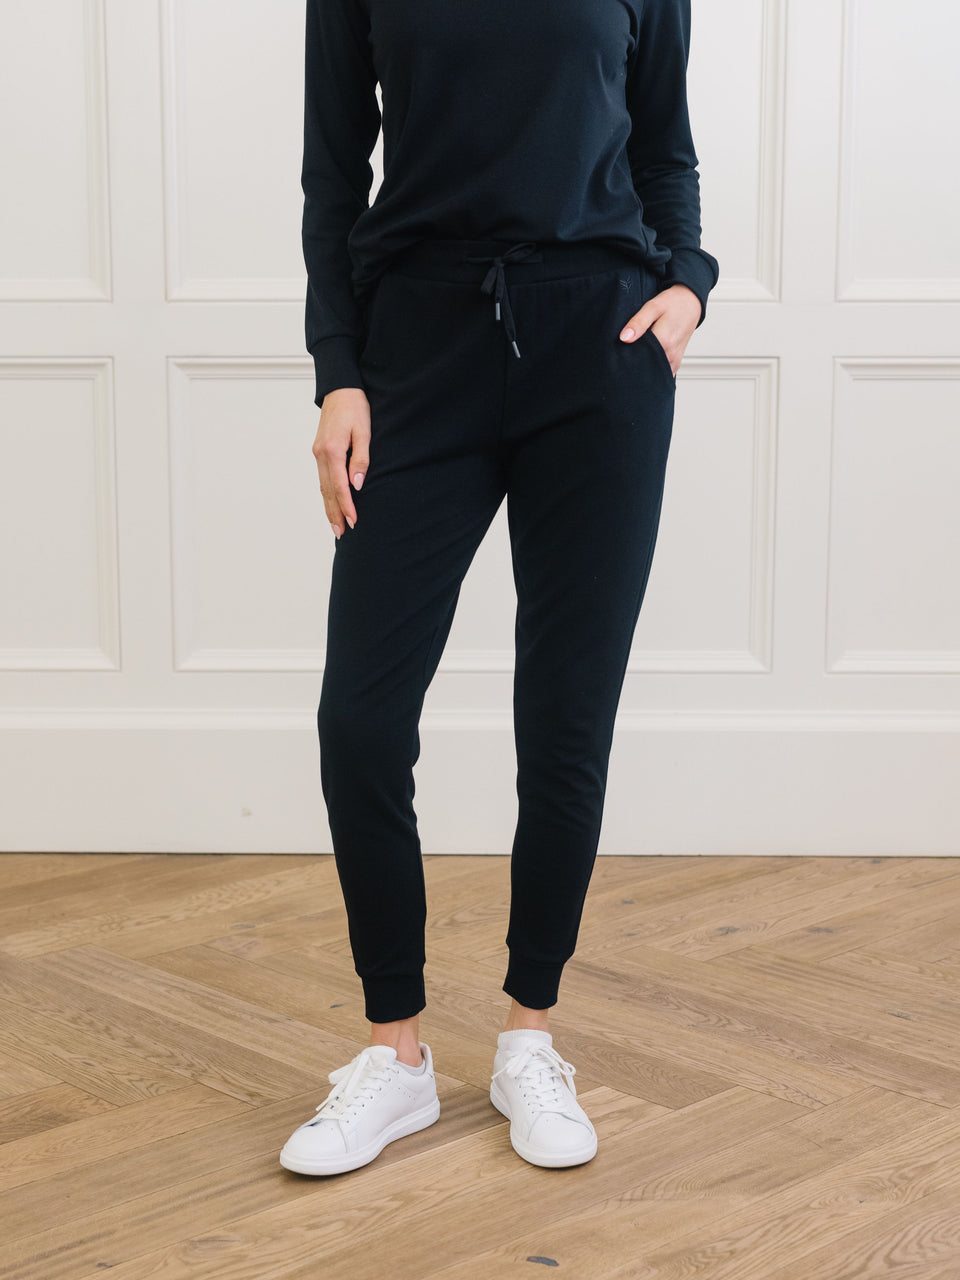 How to Wear Jogger Sweatpants: 15 Casual & Sporty Outfits for Ladies -  FMag.com